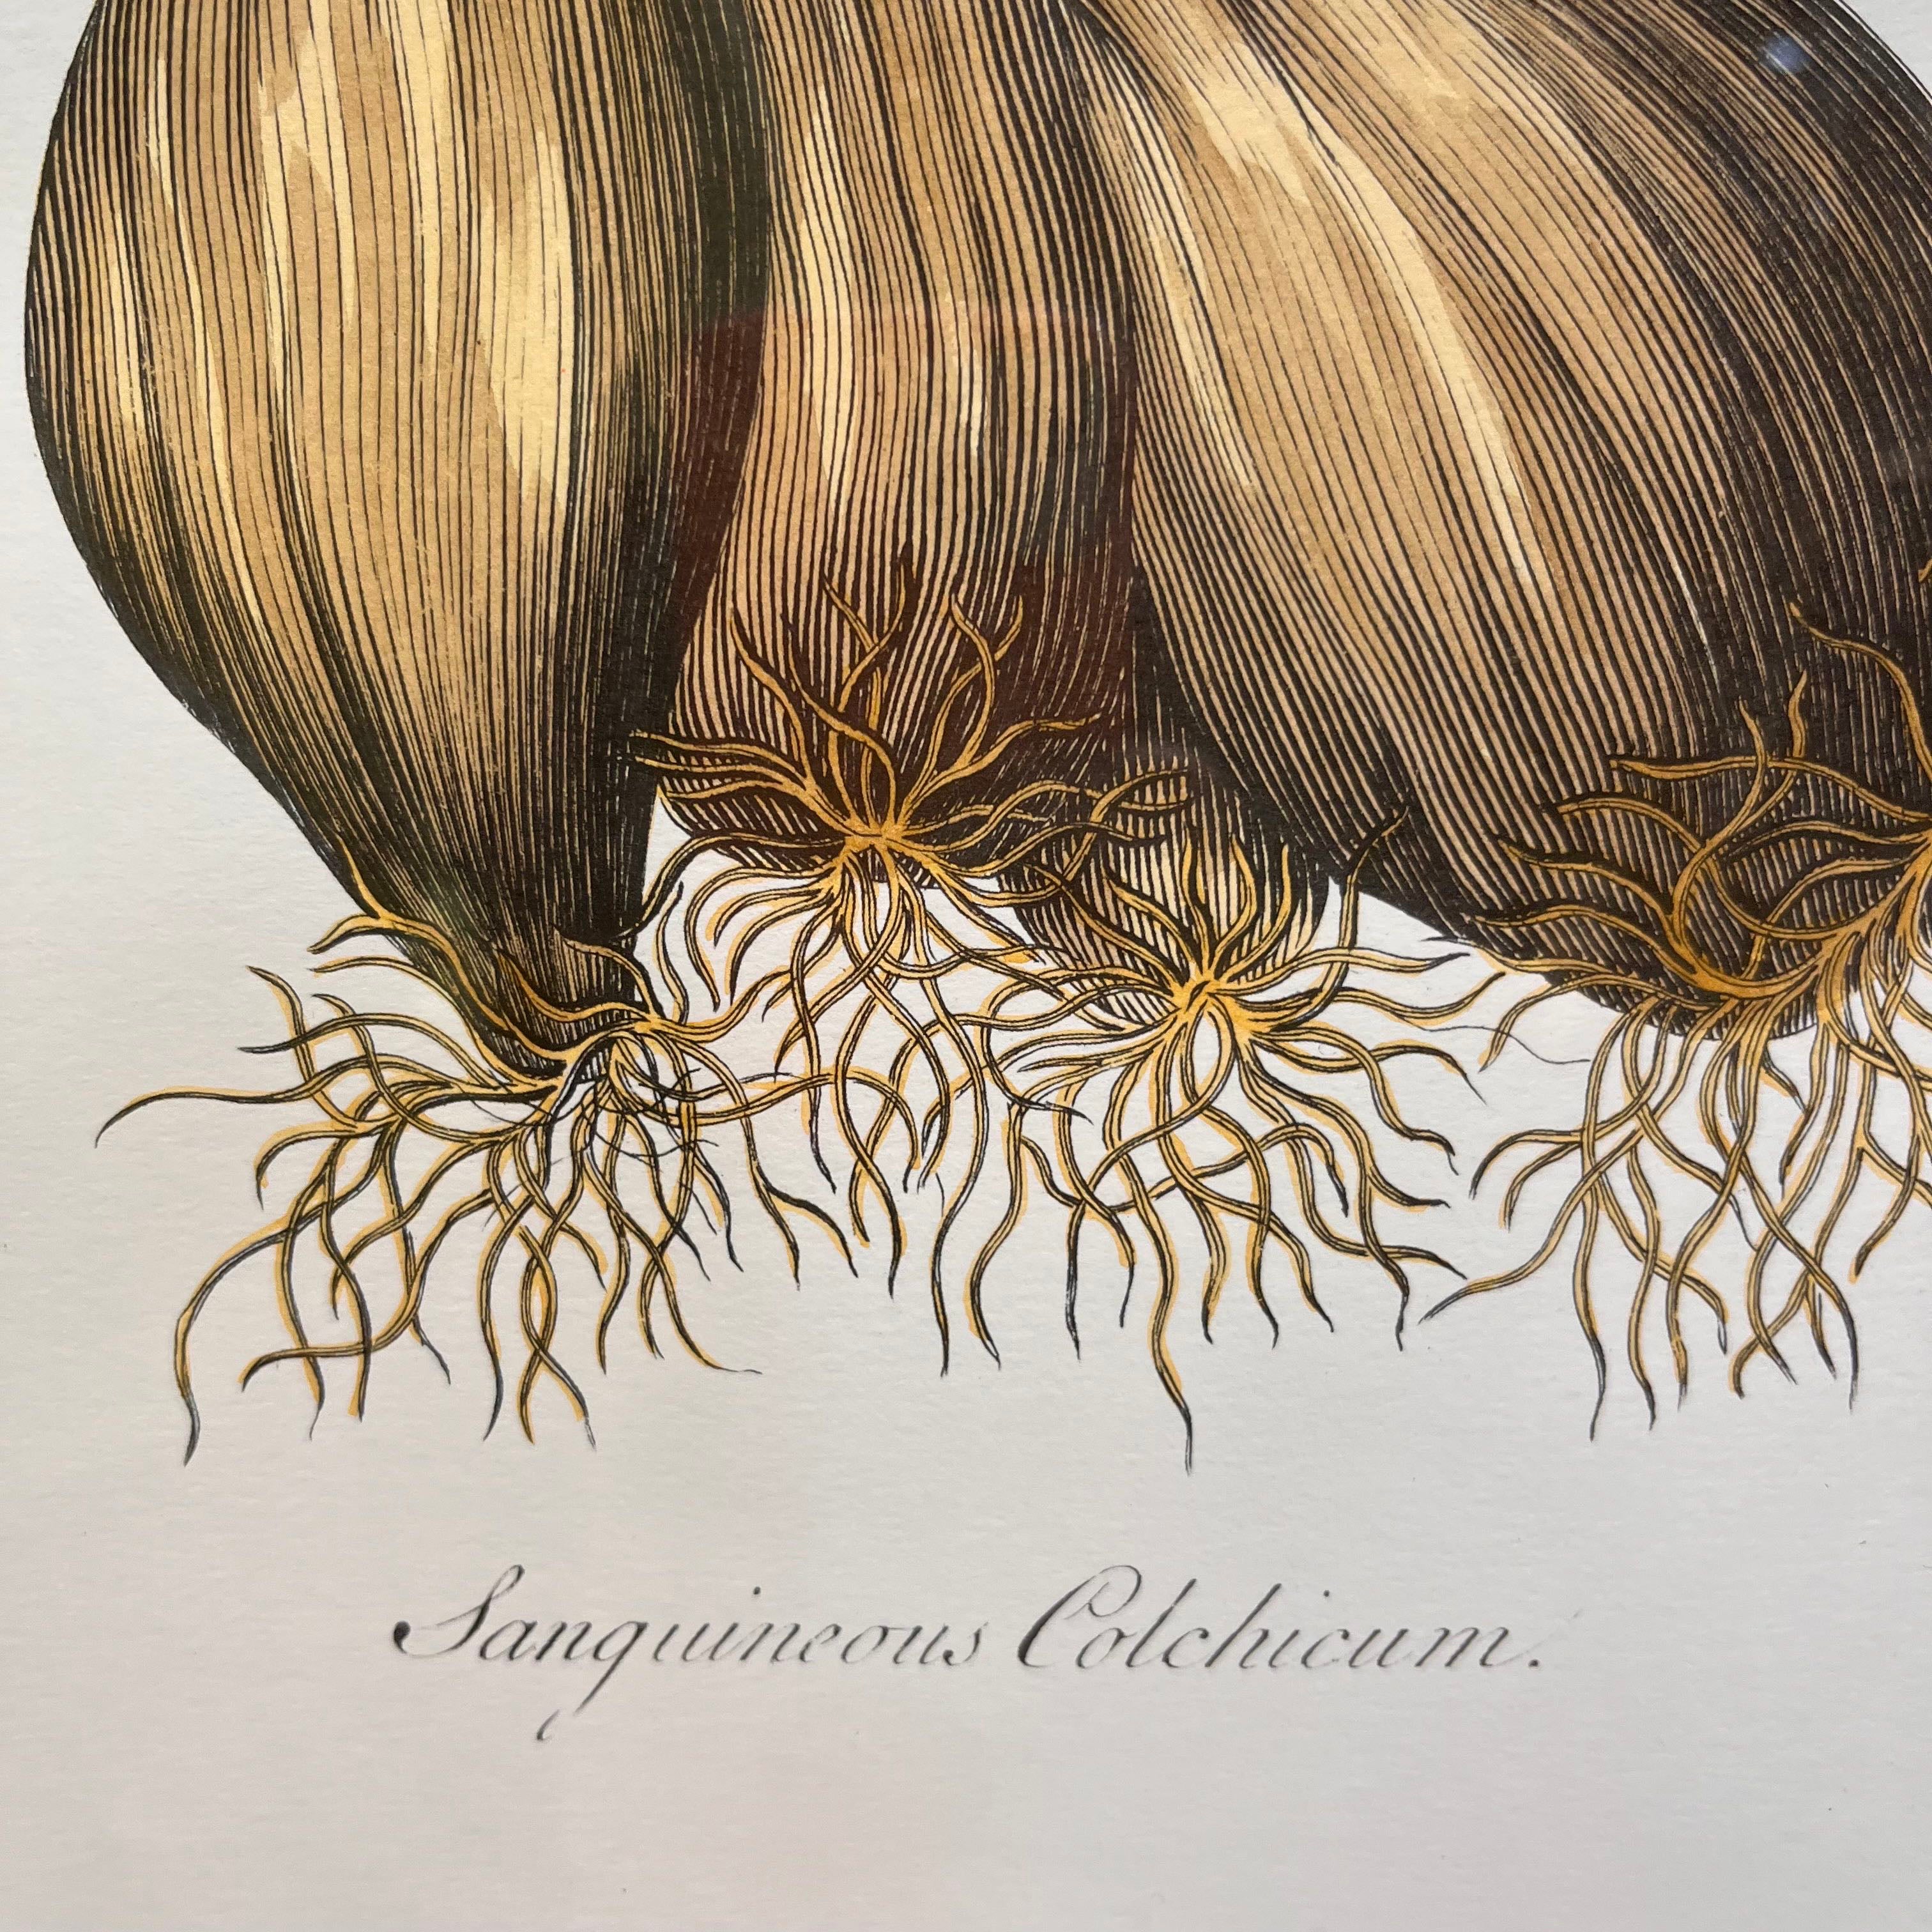 "Sanguineous Colchicum" by John Hill Engraved and Colored Print from Exotic Botany Illustrated 1759 Wall Art